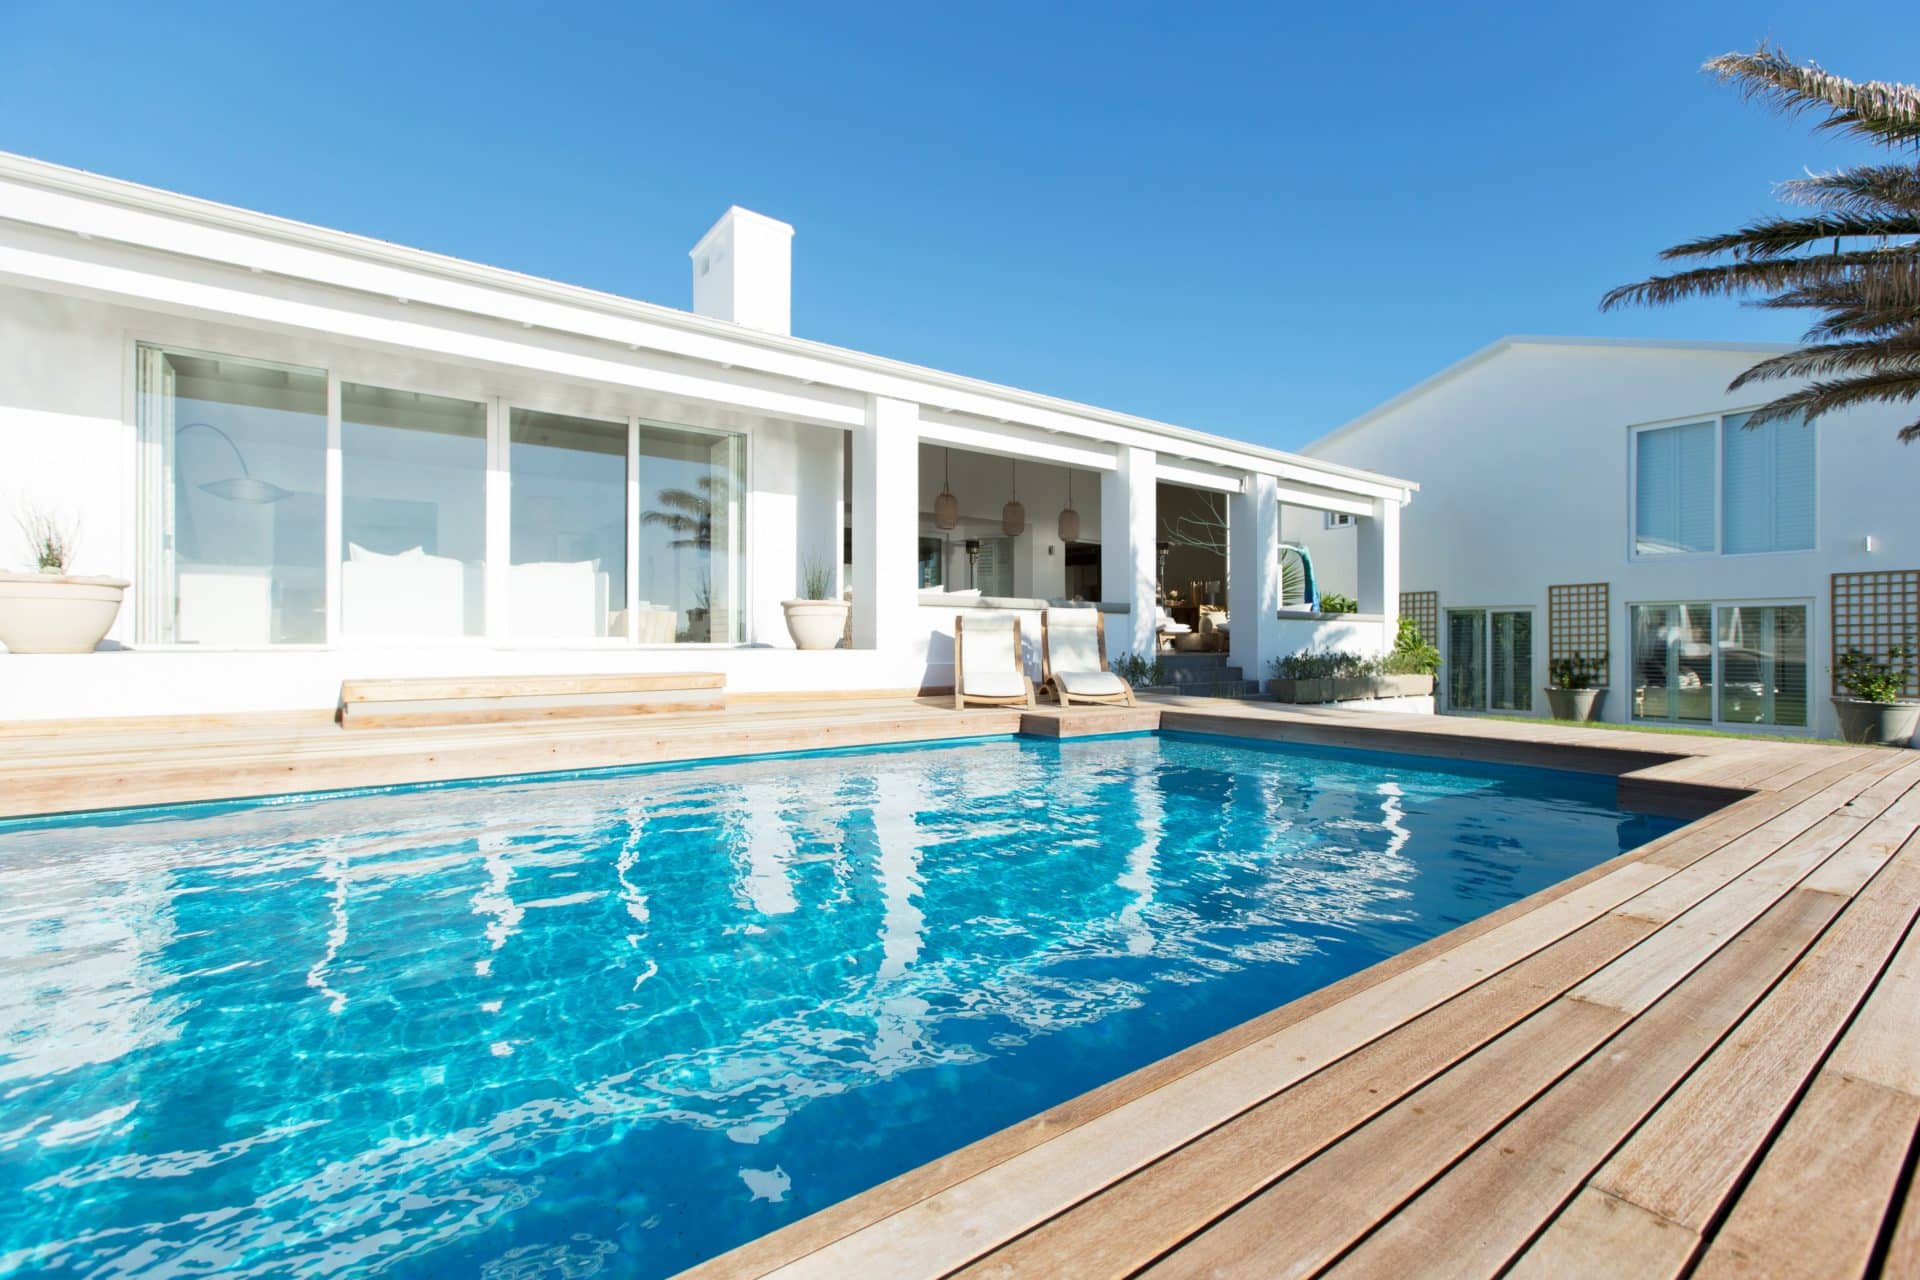 Pros and Cons of Having a House with a Pool